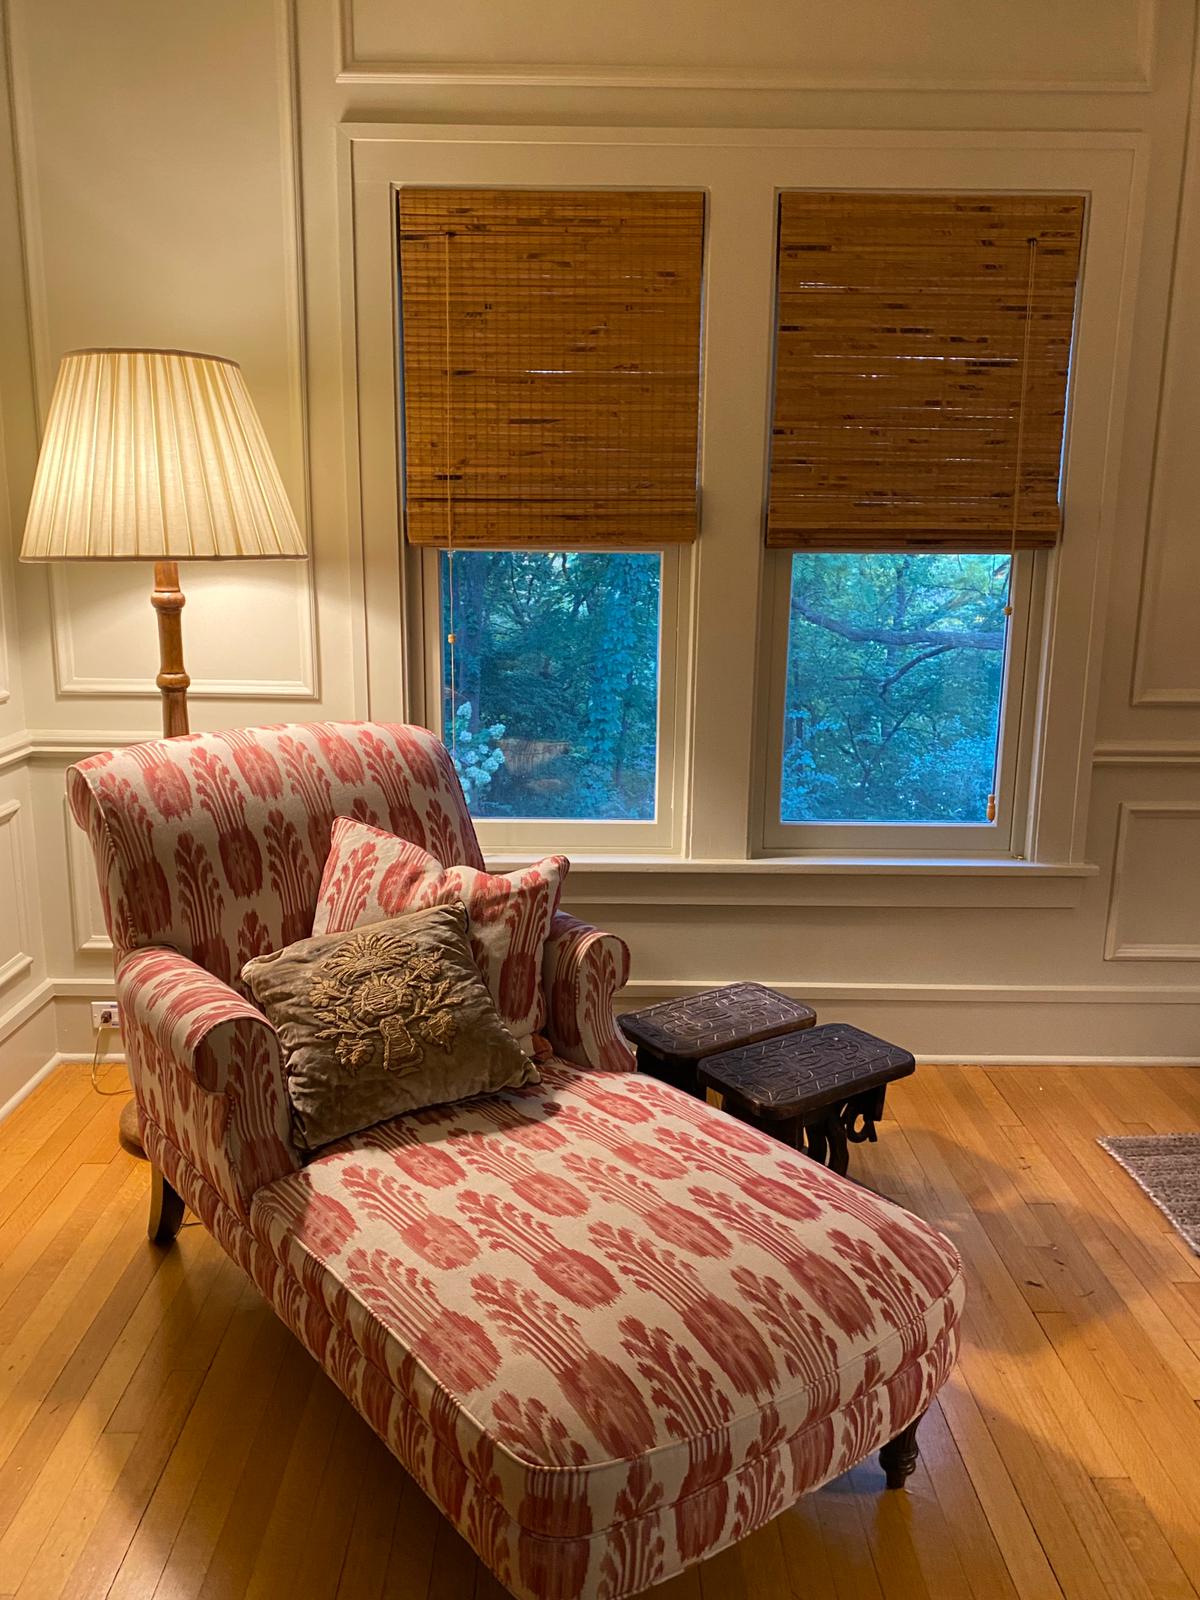 We love classical styling! This room featuring gorgeous woodwork and antique furniture is a masterpiece! Our Woven Wood Shades are the perfect addition to this wonderful space.  BudgetBlindsMankato  WovenWoodShades  NaturalShades  FreeConsultation  WindowWednesday